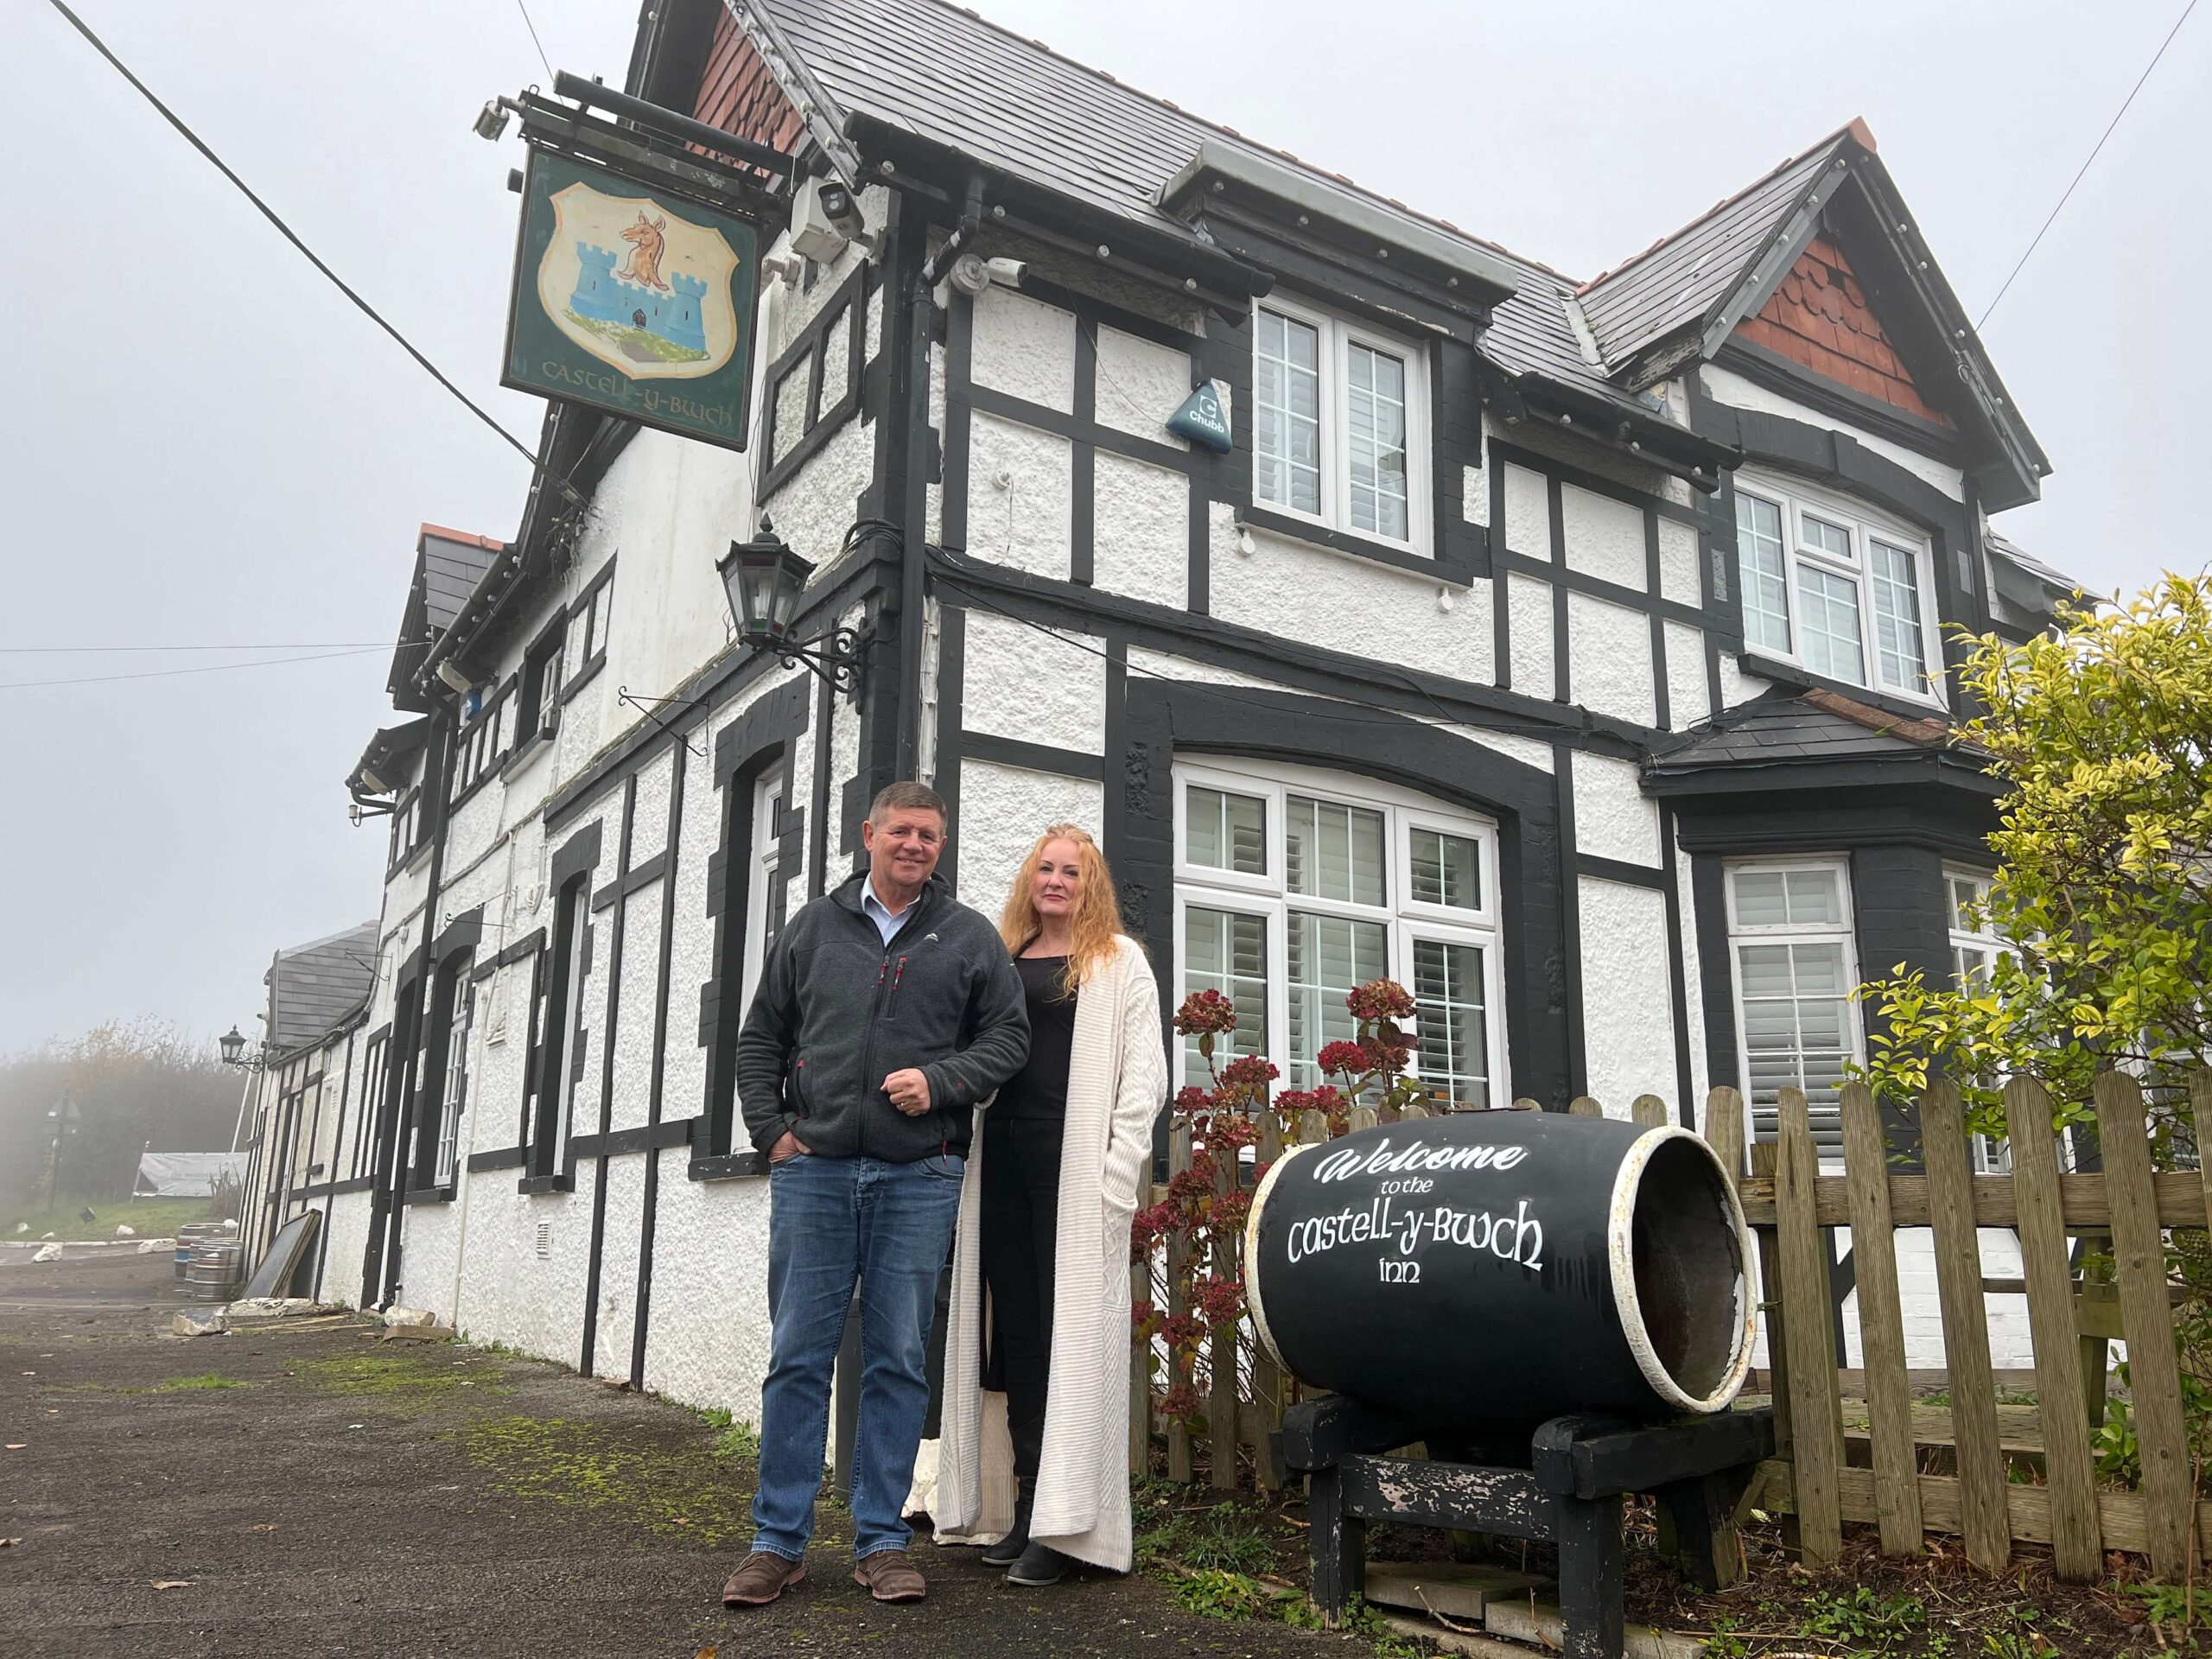 Gary and Karen Bulmer, the new owners of the Castell Y Bwch